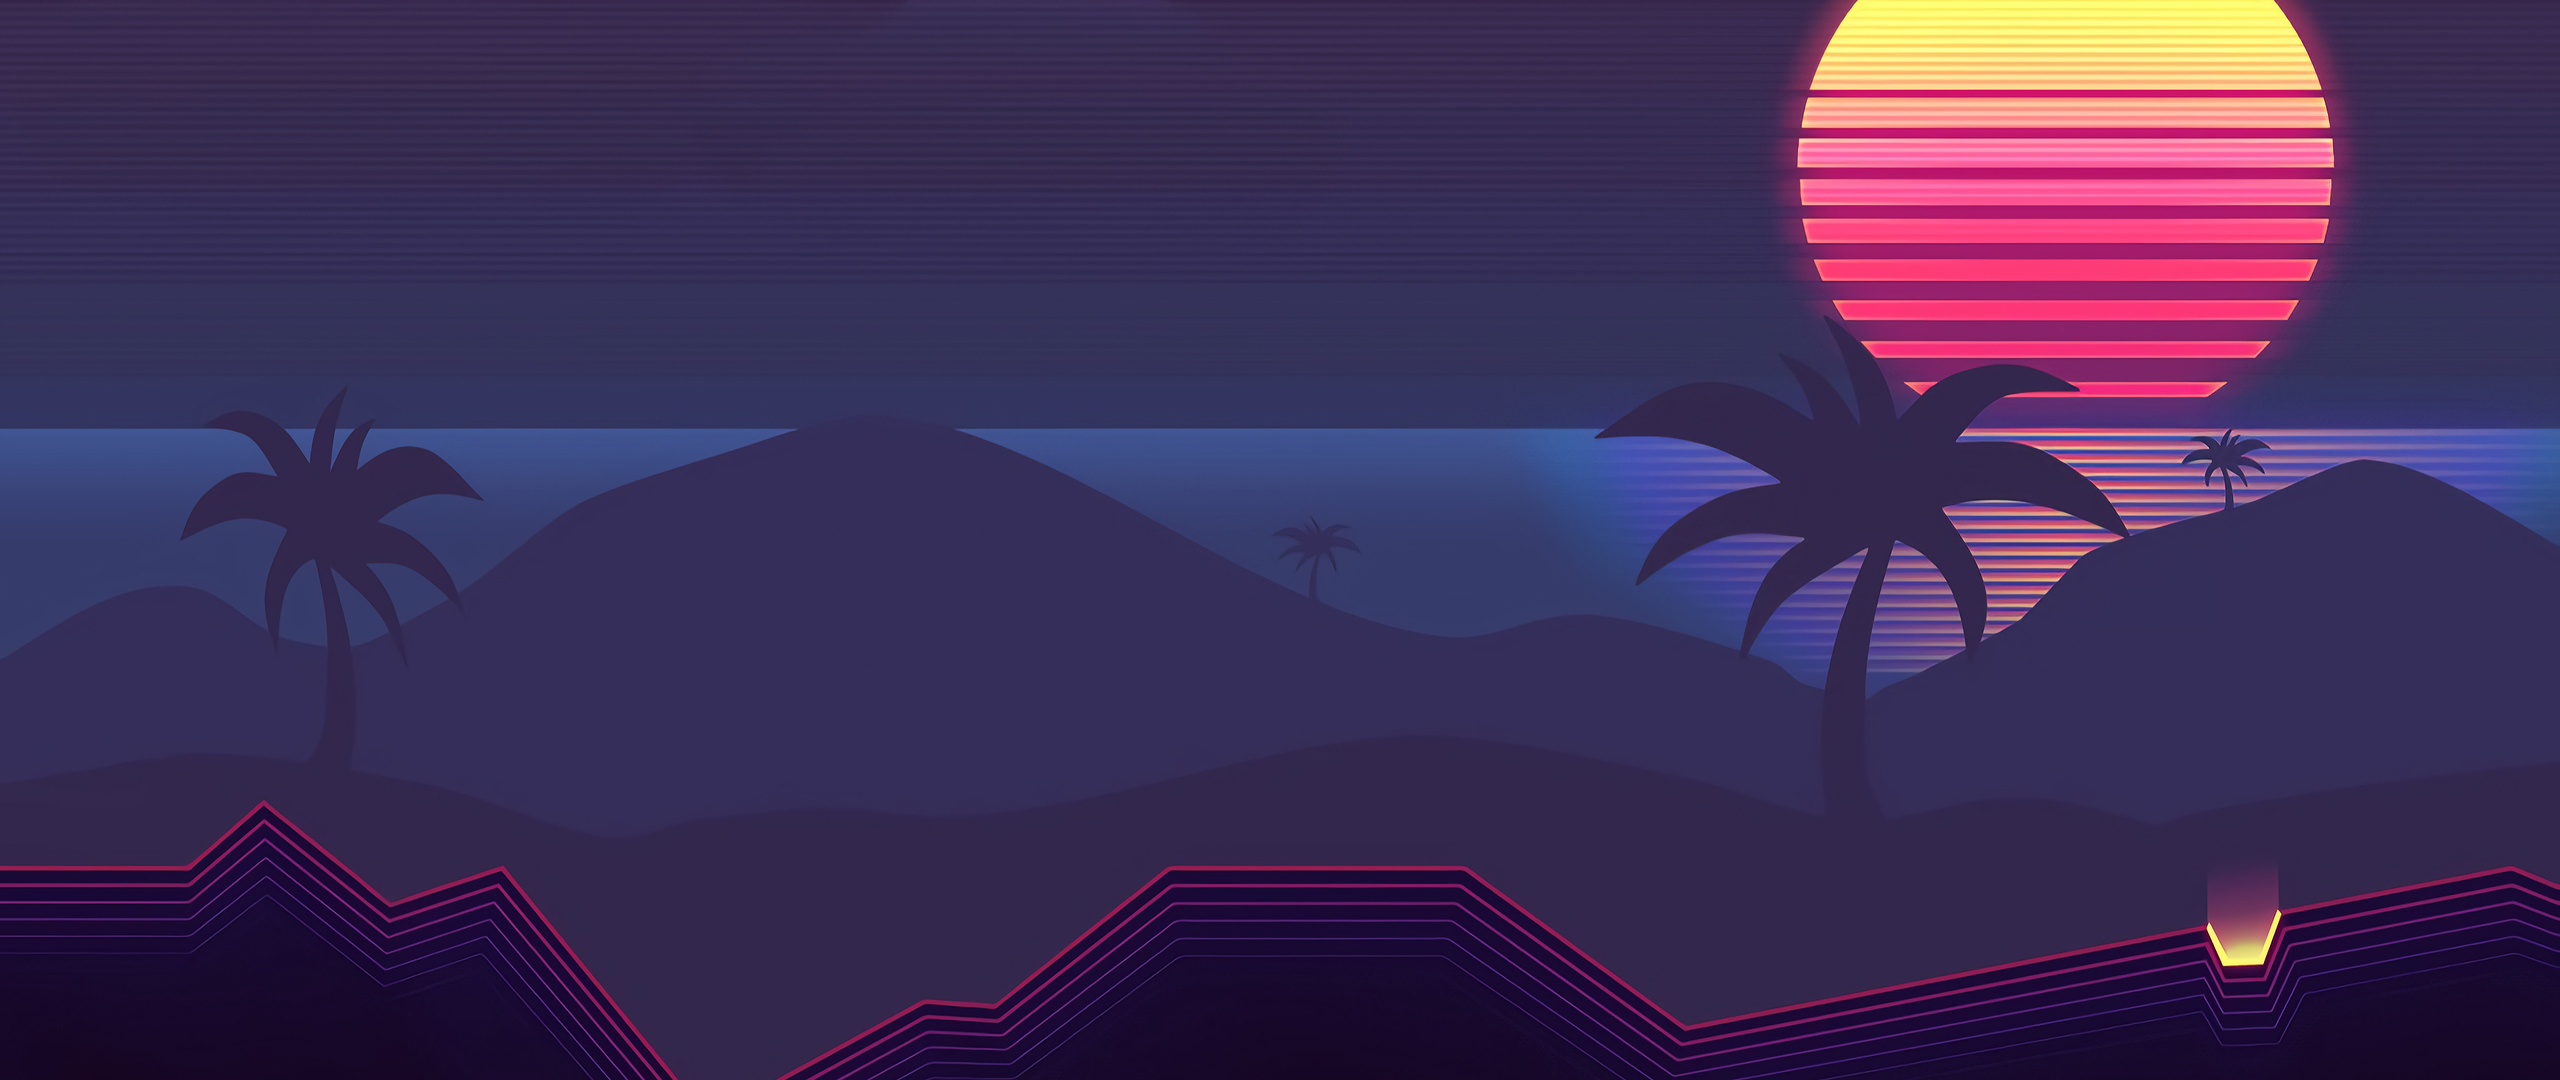 synthwave-abstract-4k-tc-2560x1080.jpg